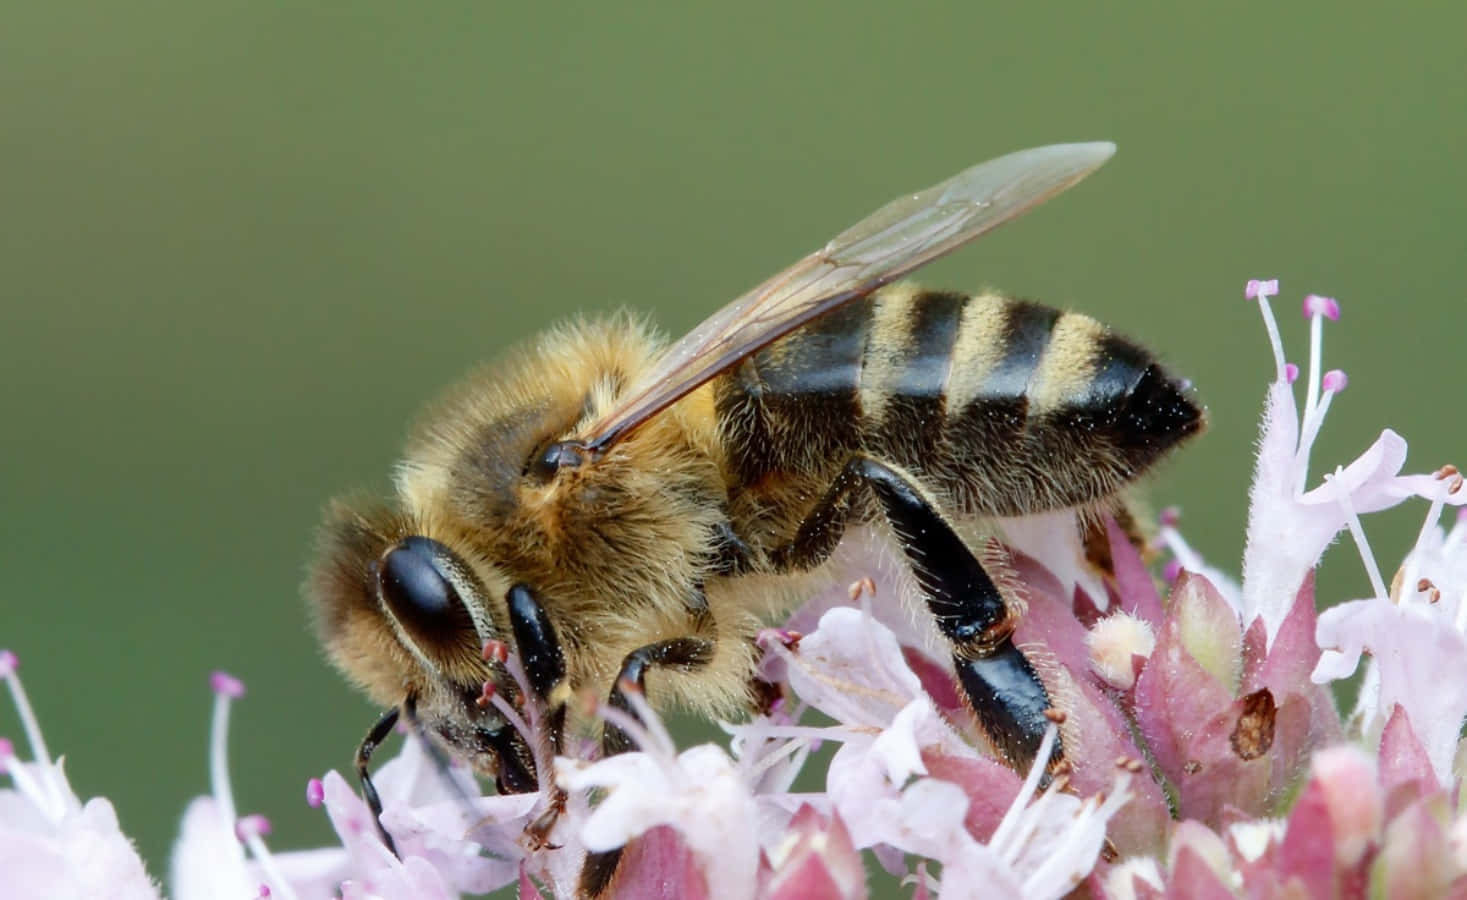 A honey bee collecting nectar from a flower